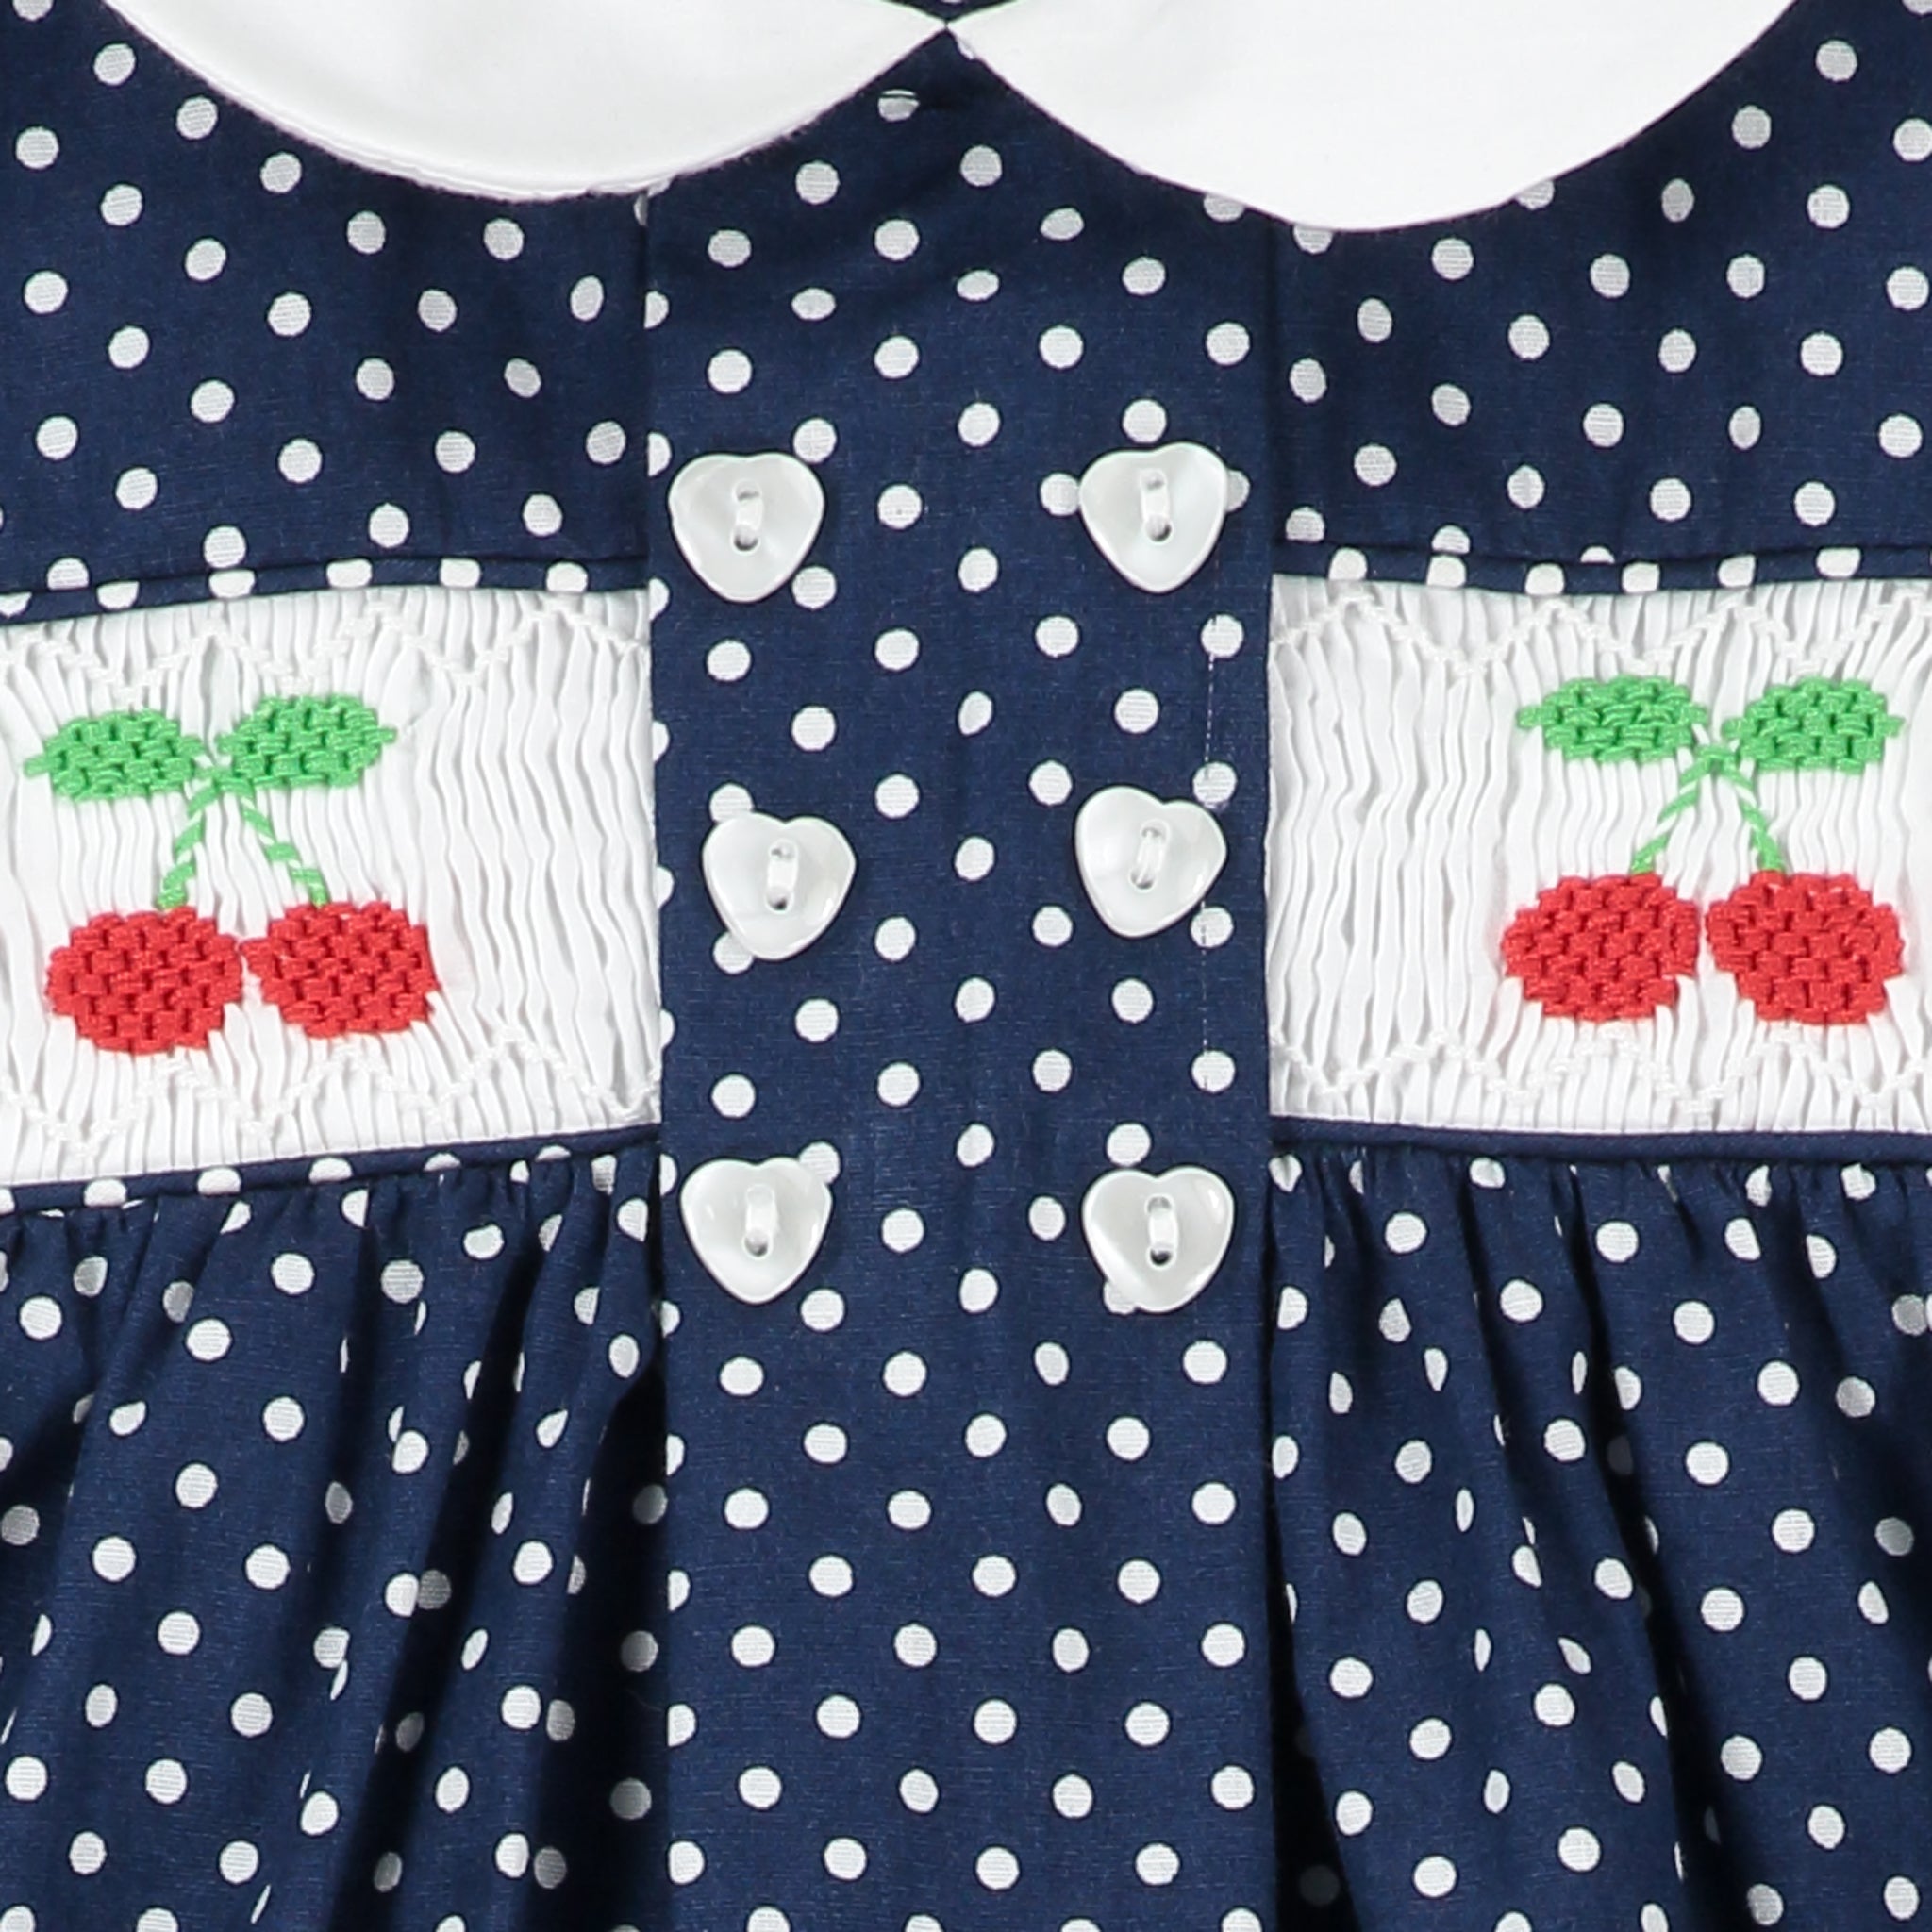 smocking and cherry embroidery close up